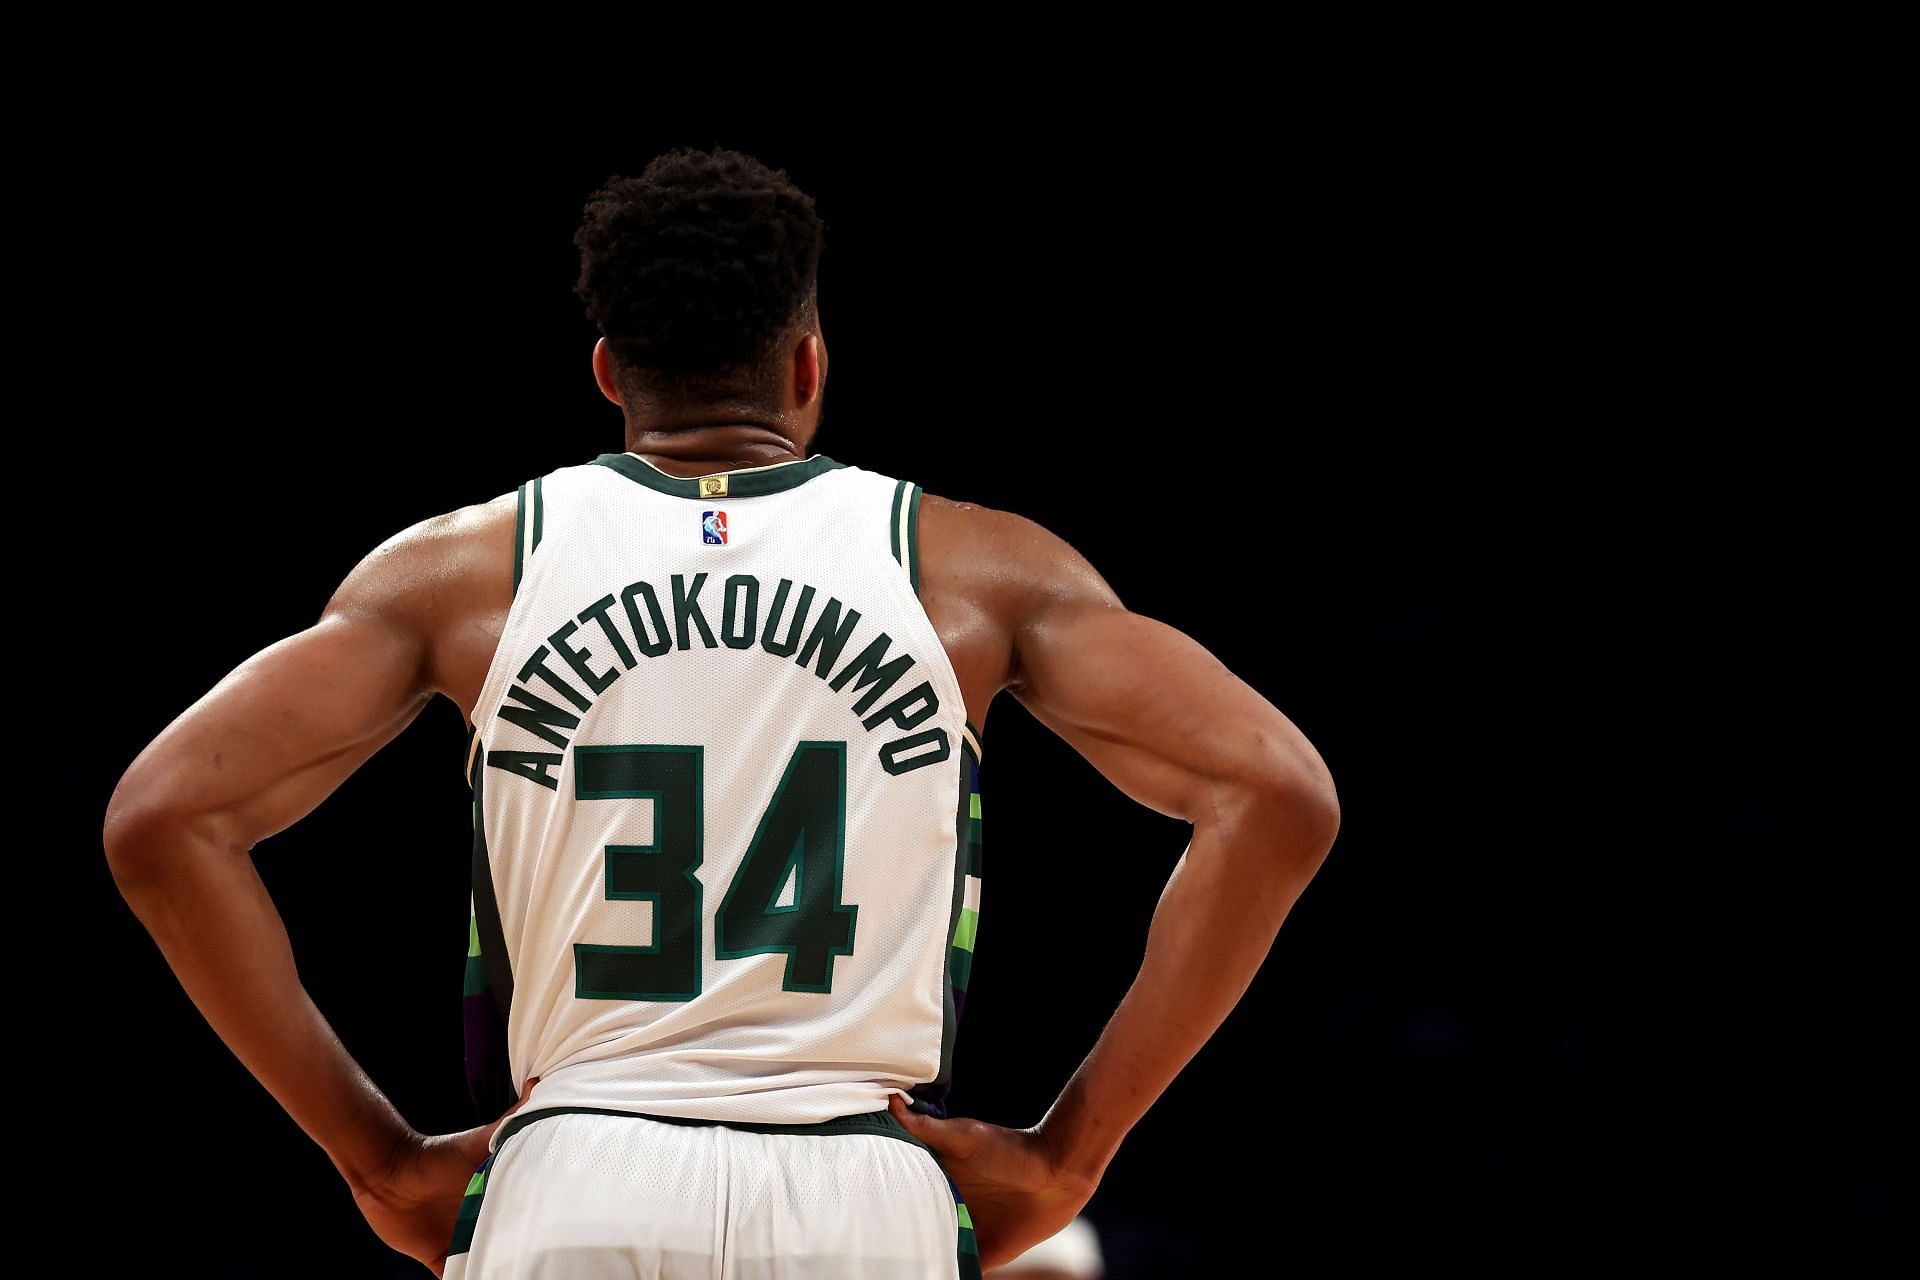 Giannis Antetokounmpo will be hoping to lead the Milwaukee Bucks to another championship run this season